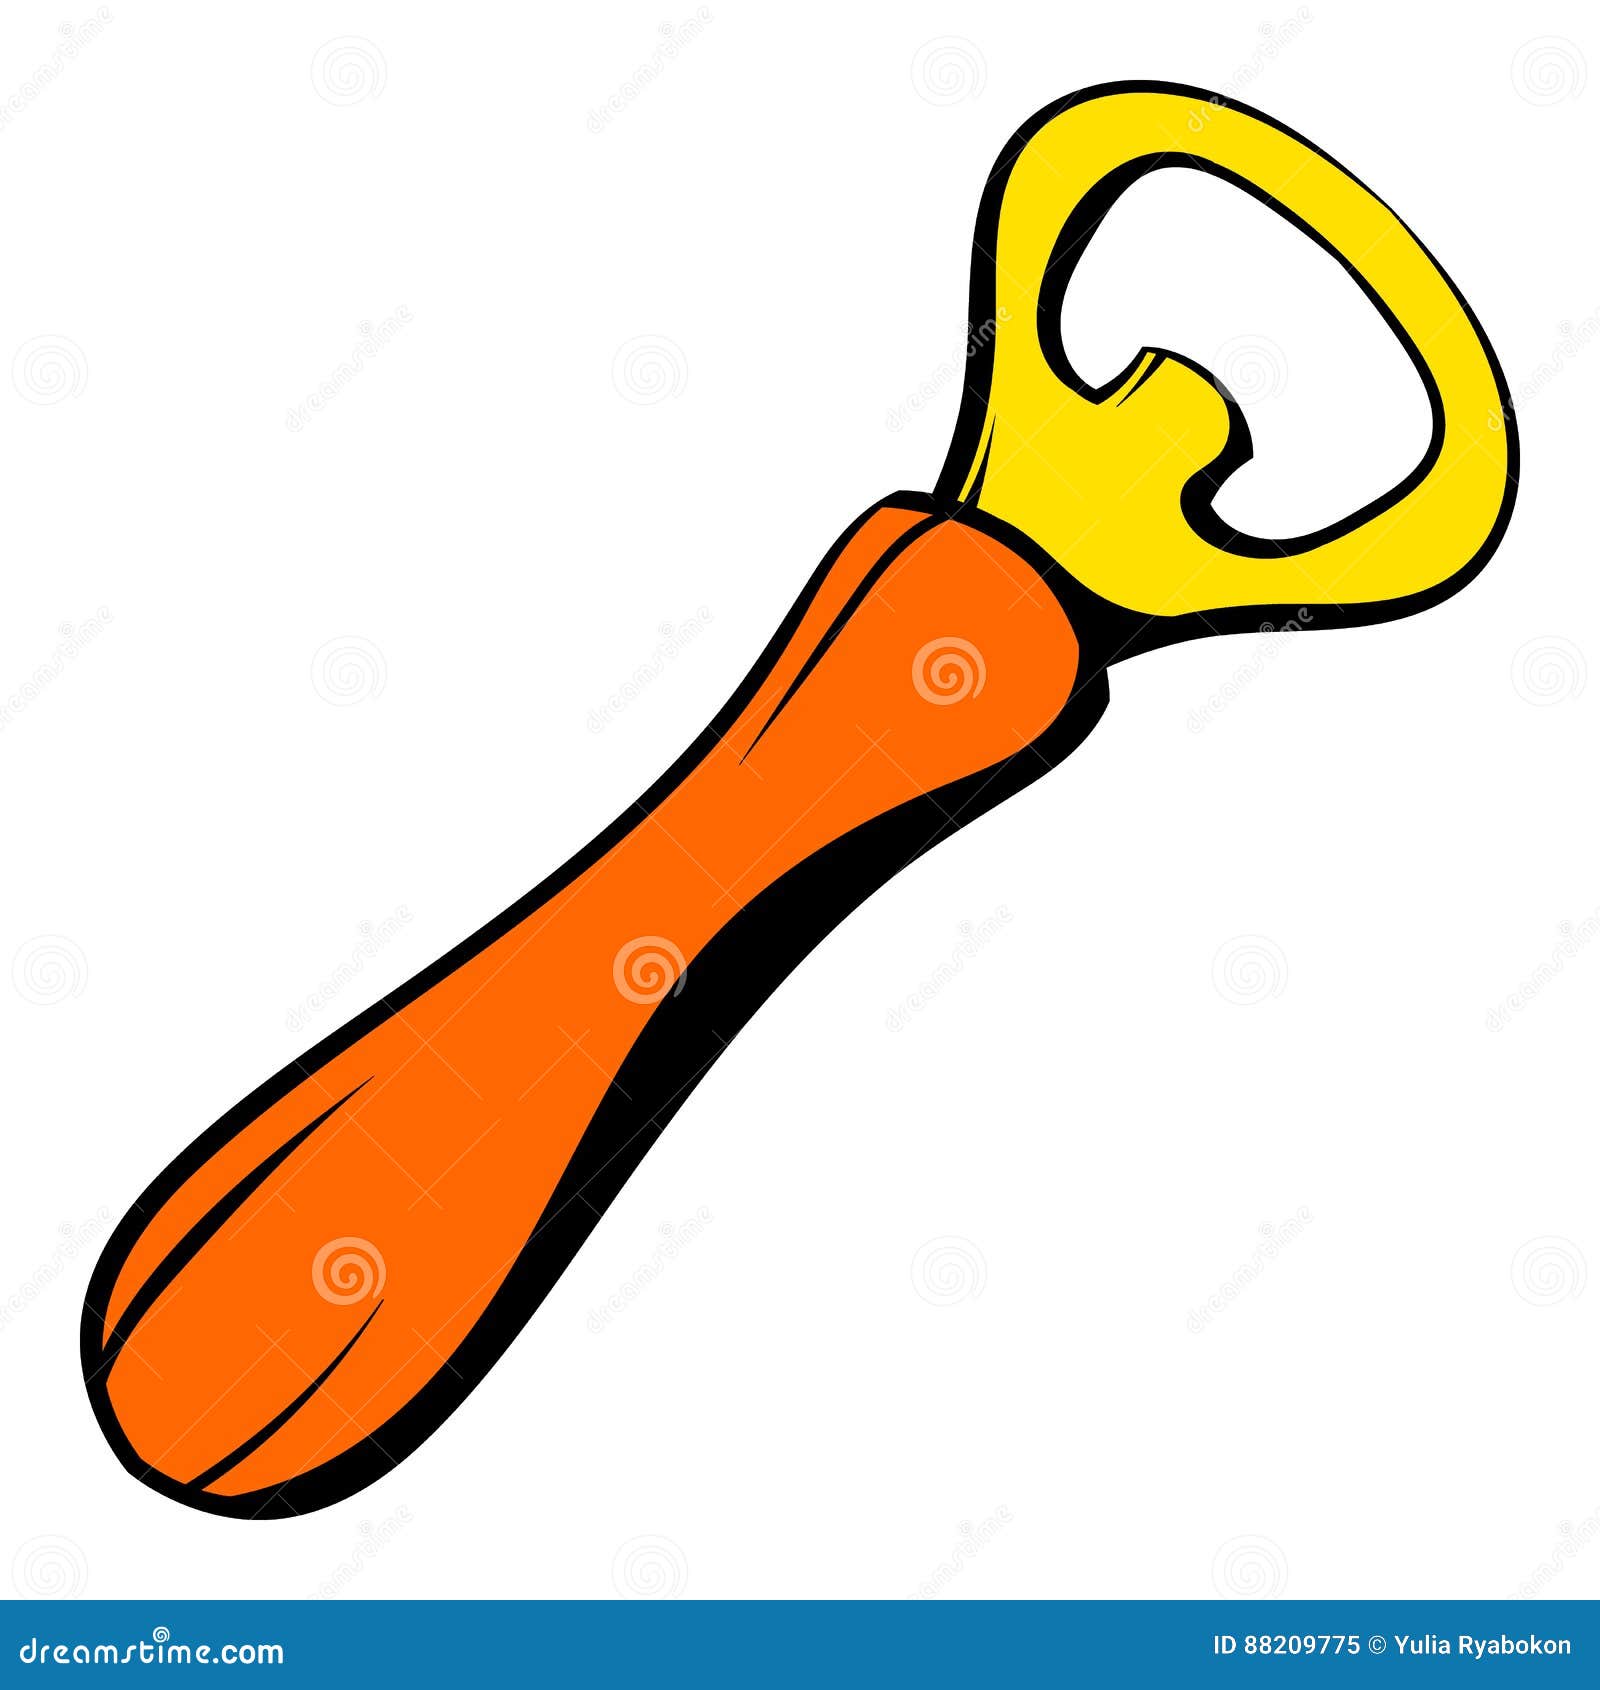 https://thumbs.dreamstime.com/z/bottle-opener-icon-icon-cartoon-style-isolated-vector-illustration-88209775.jpg